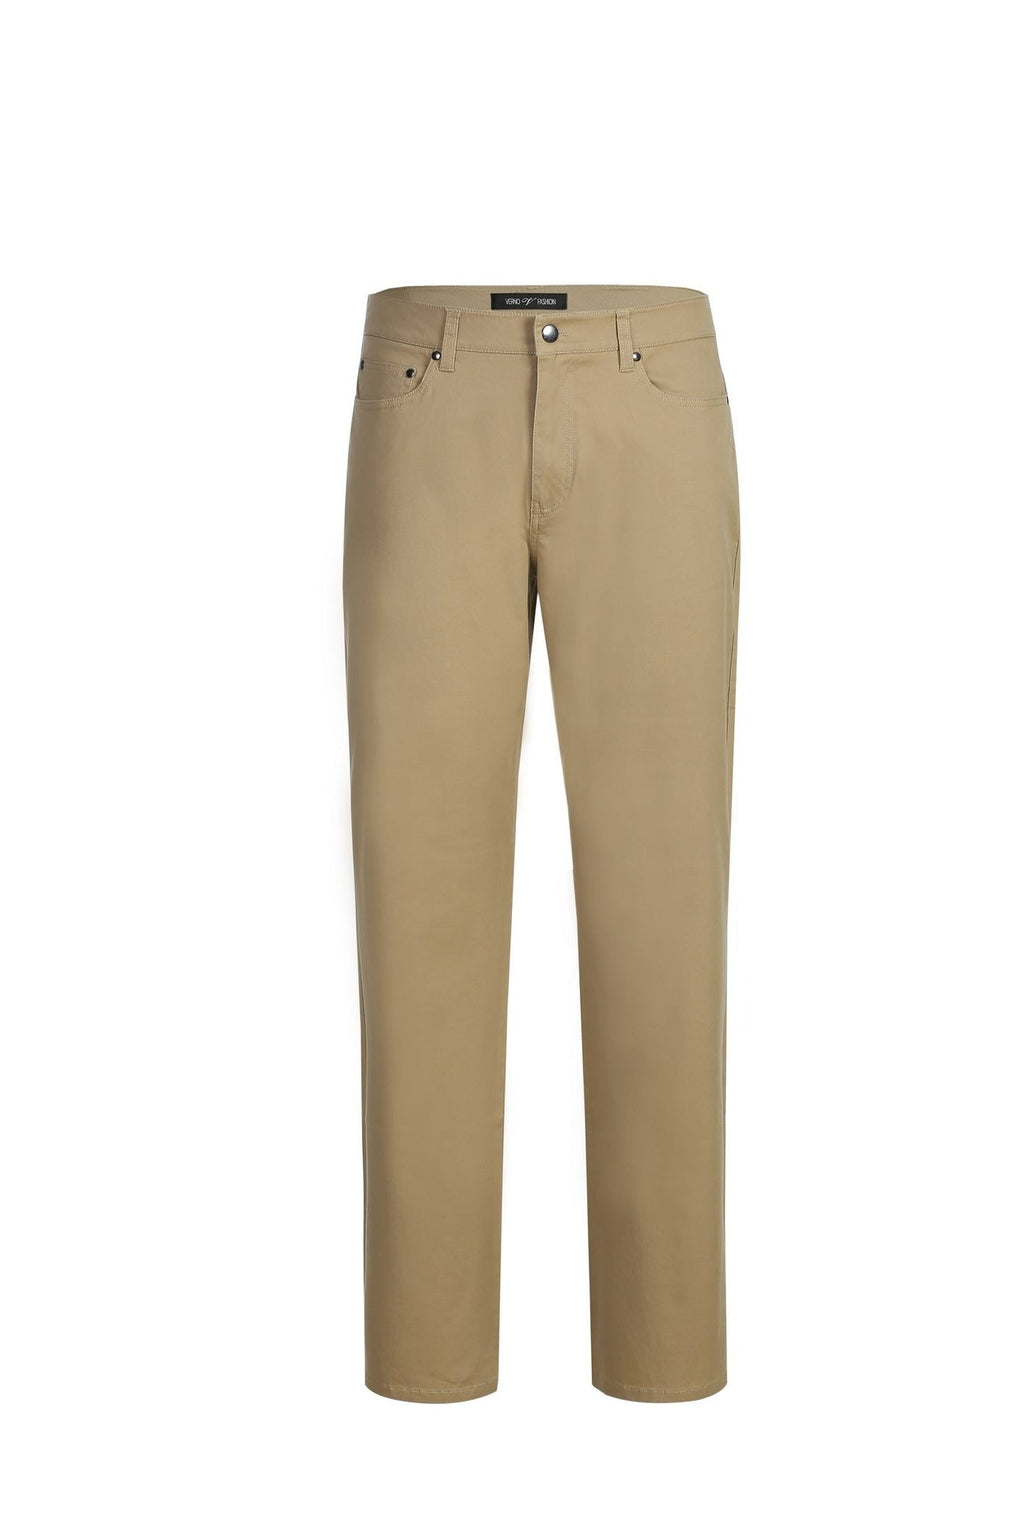 Straight Fit 5 Pocket Trousers  Lee  MS